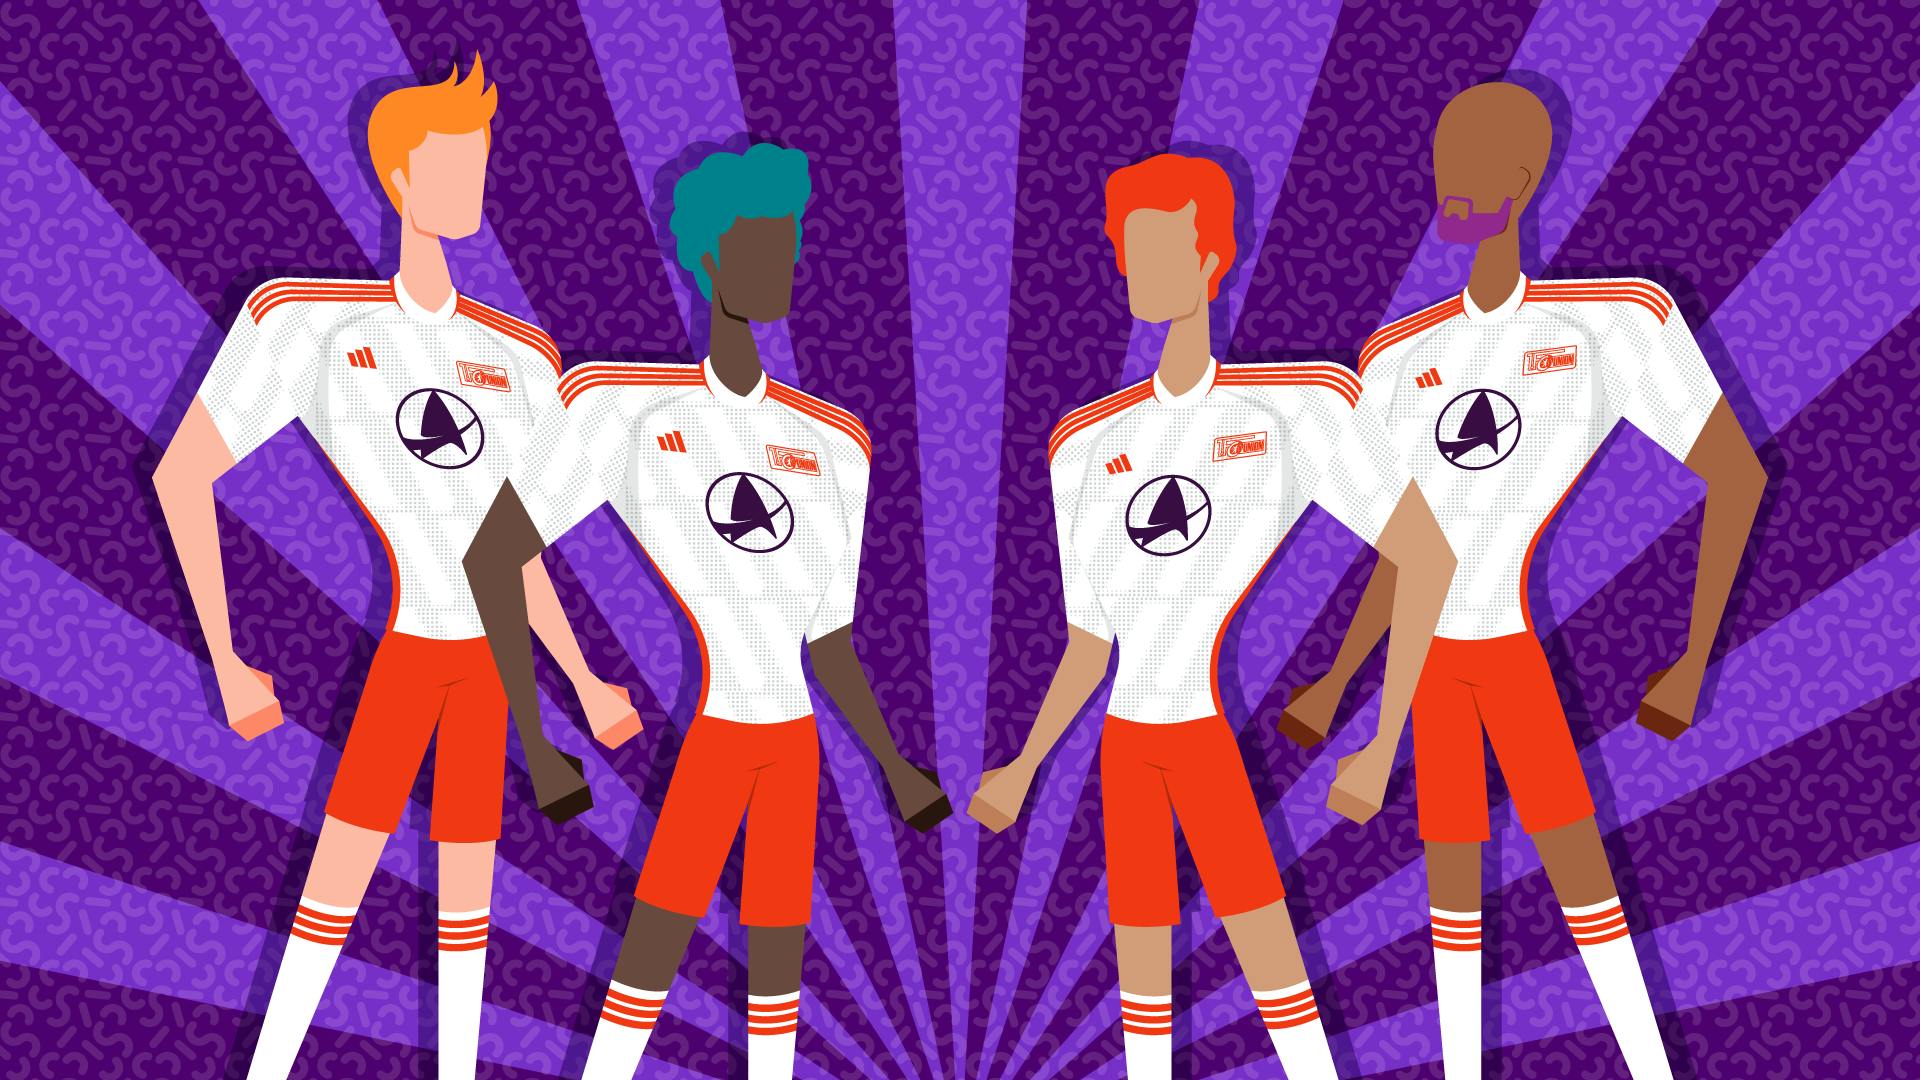 Graphic illustration of Union Berlin players wearing Star Trek: Discovery jerseys